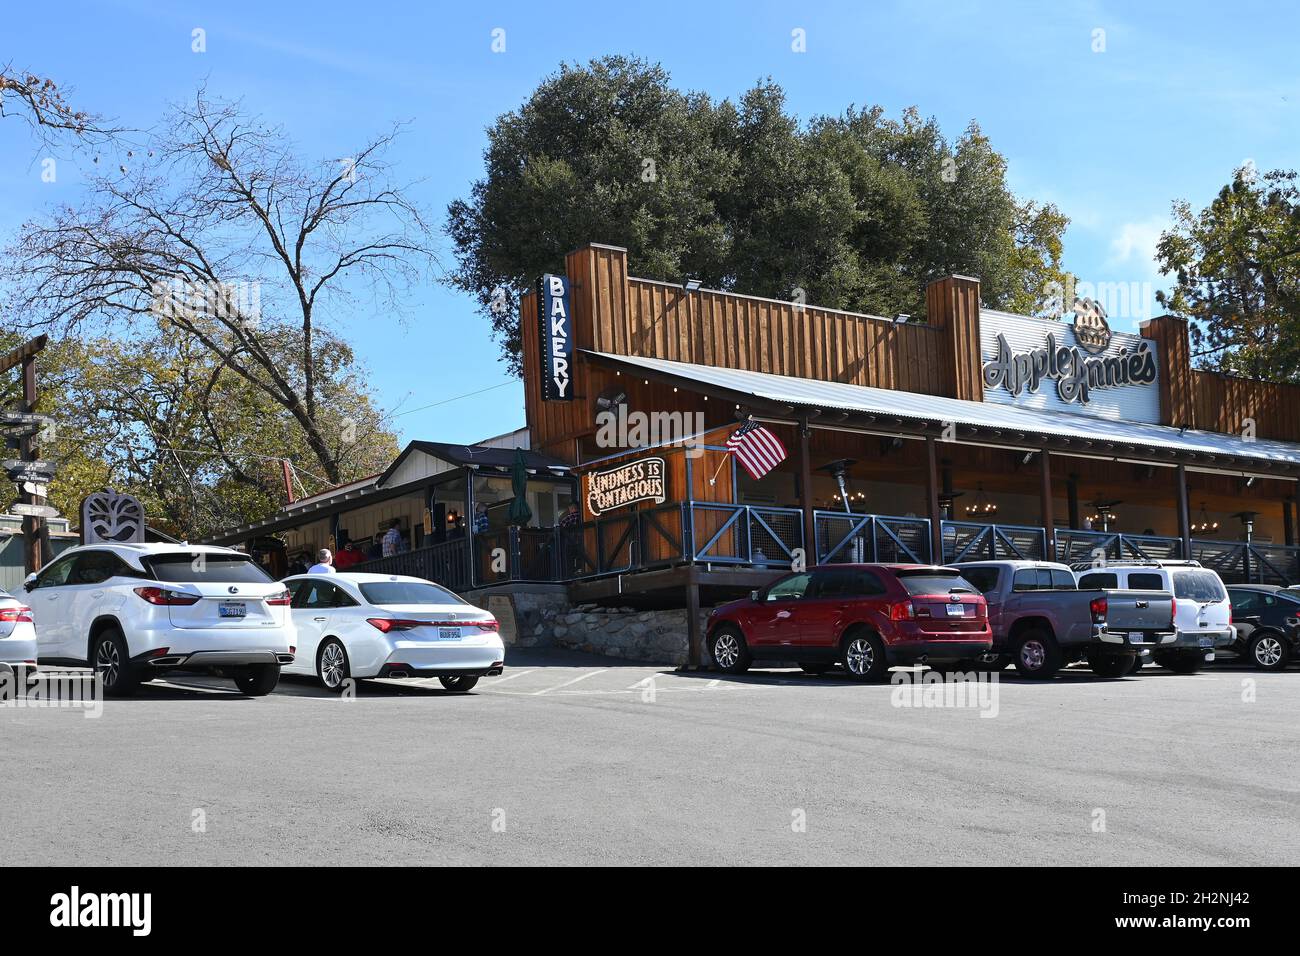 OAK GLEN, CALIFORNIA - 10 OCT 2021: Apple Annies Restaurant at Oak Tree Mountain established 50 years ago as a small apple shed has grown to be a 14- Stock Photo